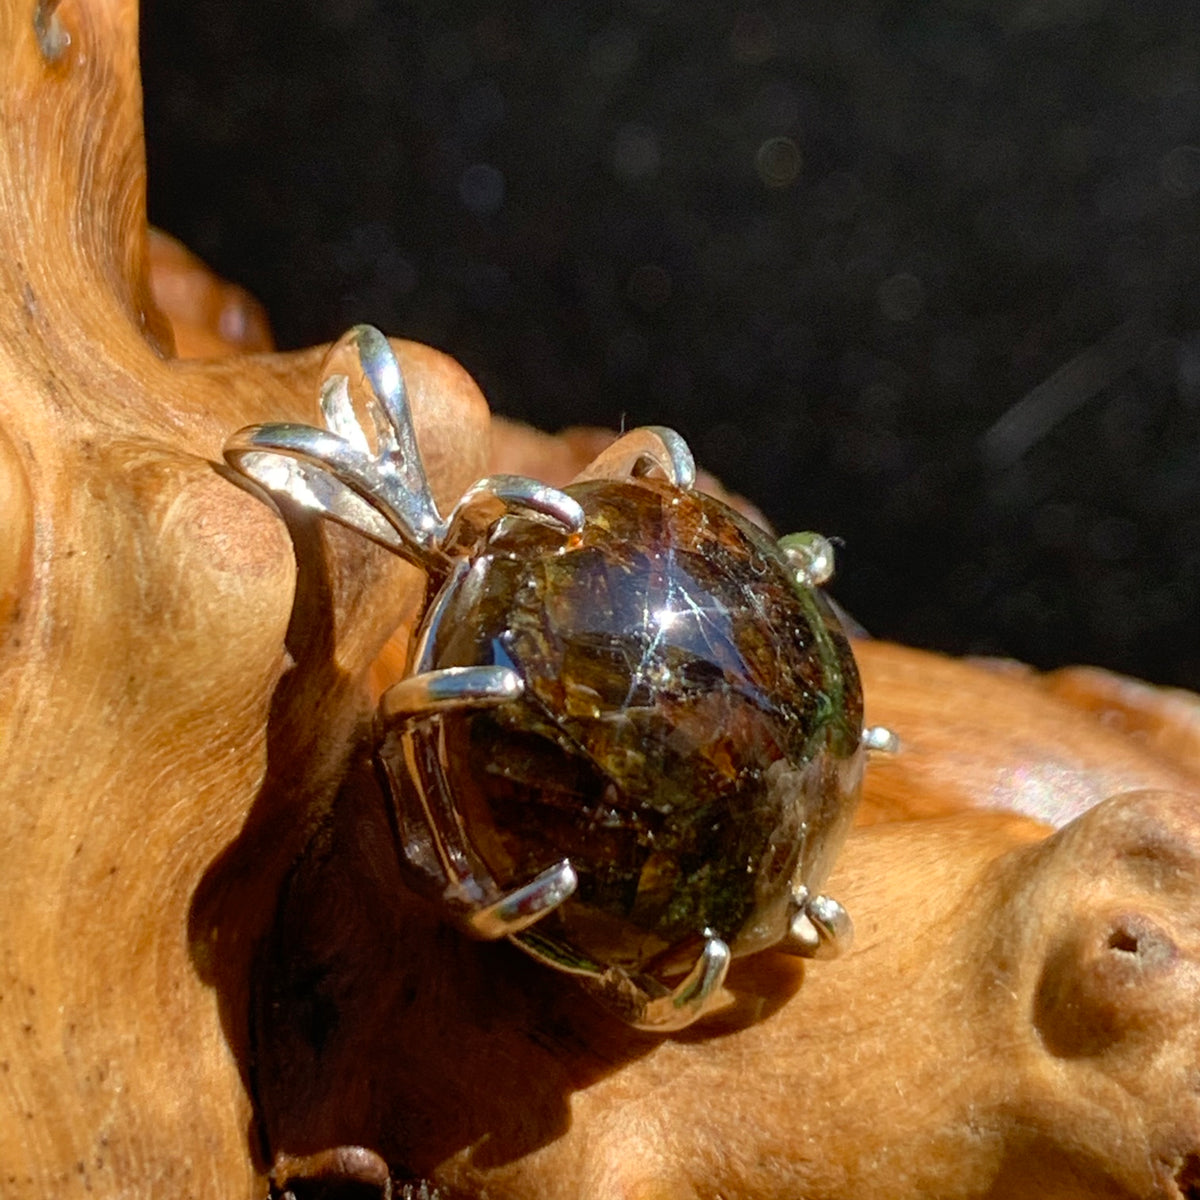 sterling silver sericho pallasite meteorite basket pendant sitting on driftwood for display